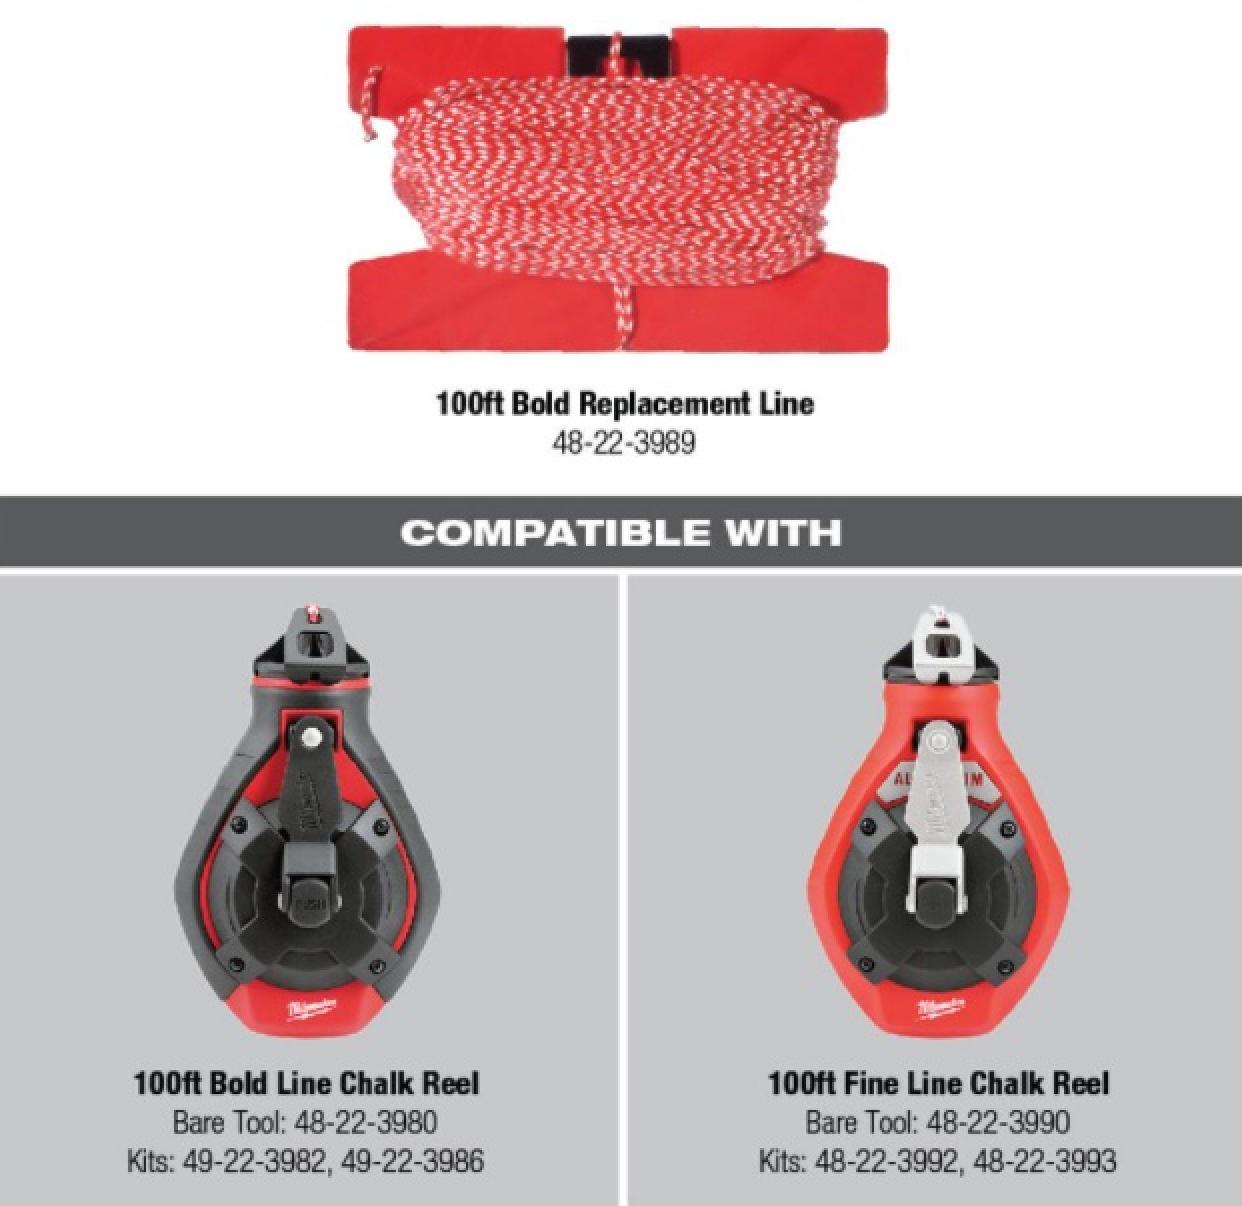 Milwaukee 100 Foot Bold Chalk Wheel Replacement Line Compatibility Information Panel